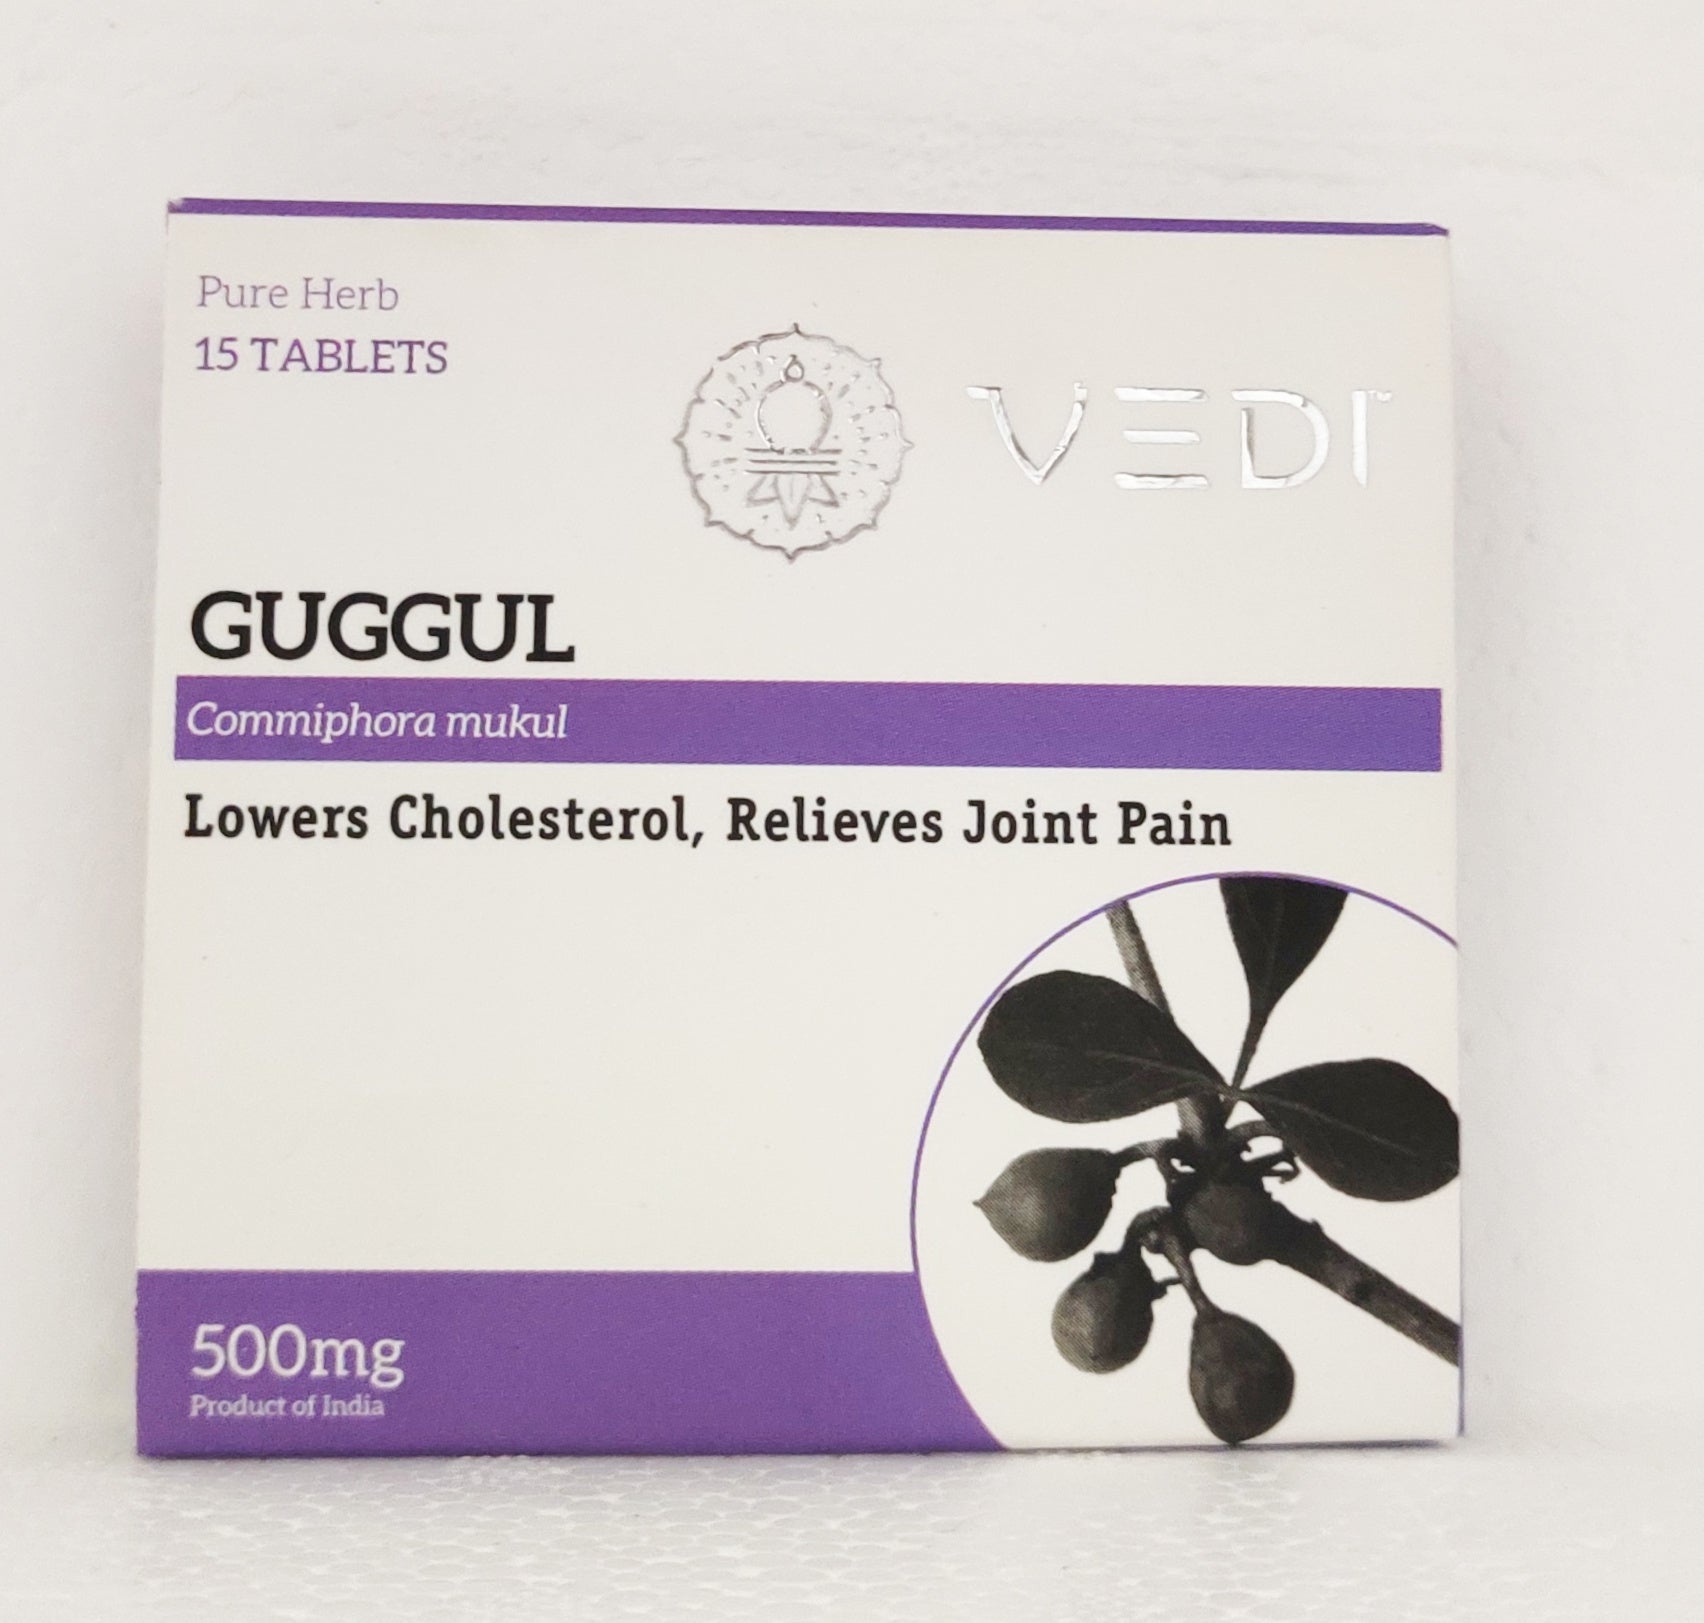 Shop Guggul tablets - 15tablets at price 99.00 from Vedi Herbals Online - Ayush Care